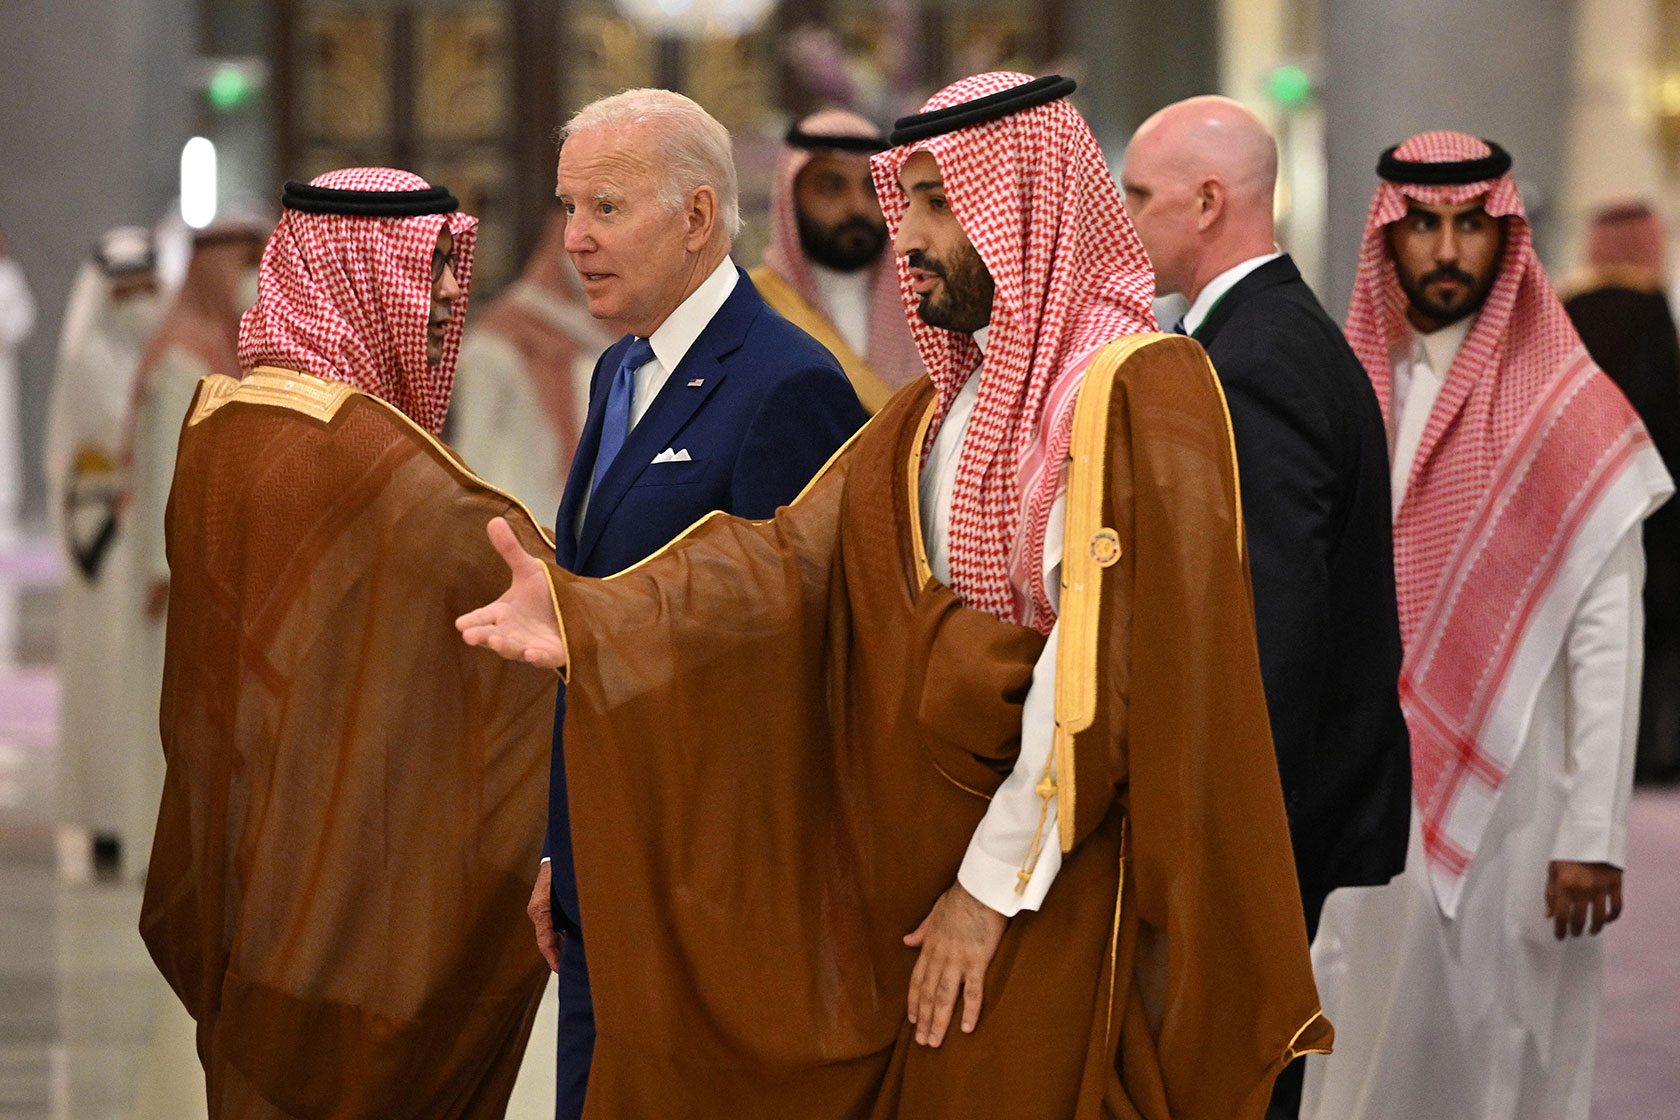 Photo shows Joe Biden and Mohammed bin Salman talking as they walk, passing by other Saudi officials